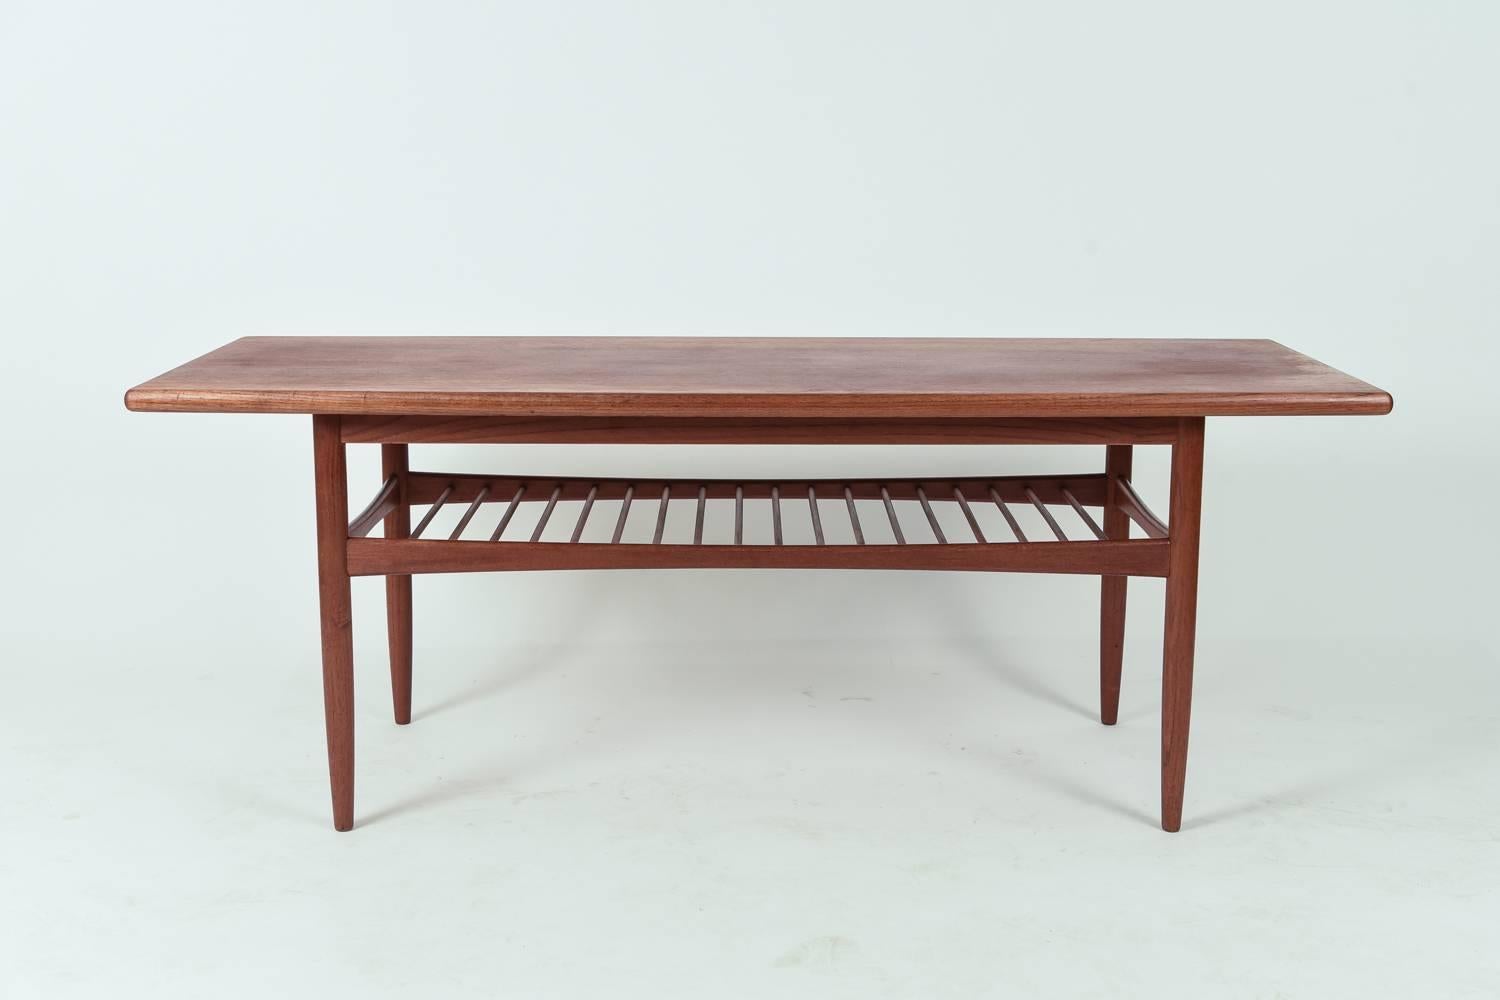 A Danish Mid-Century coffee table in the manner of Grete Jalk. Features a slatted shelf underneath.